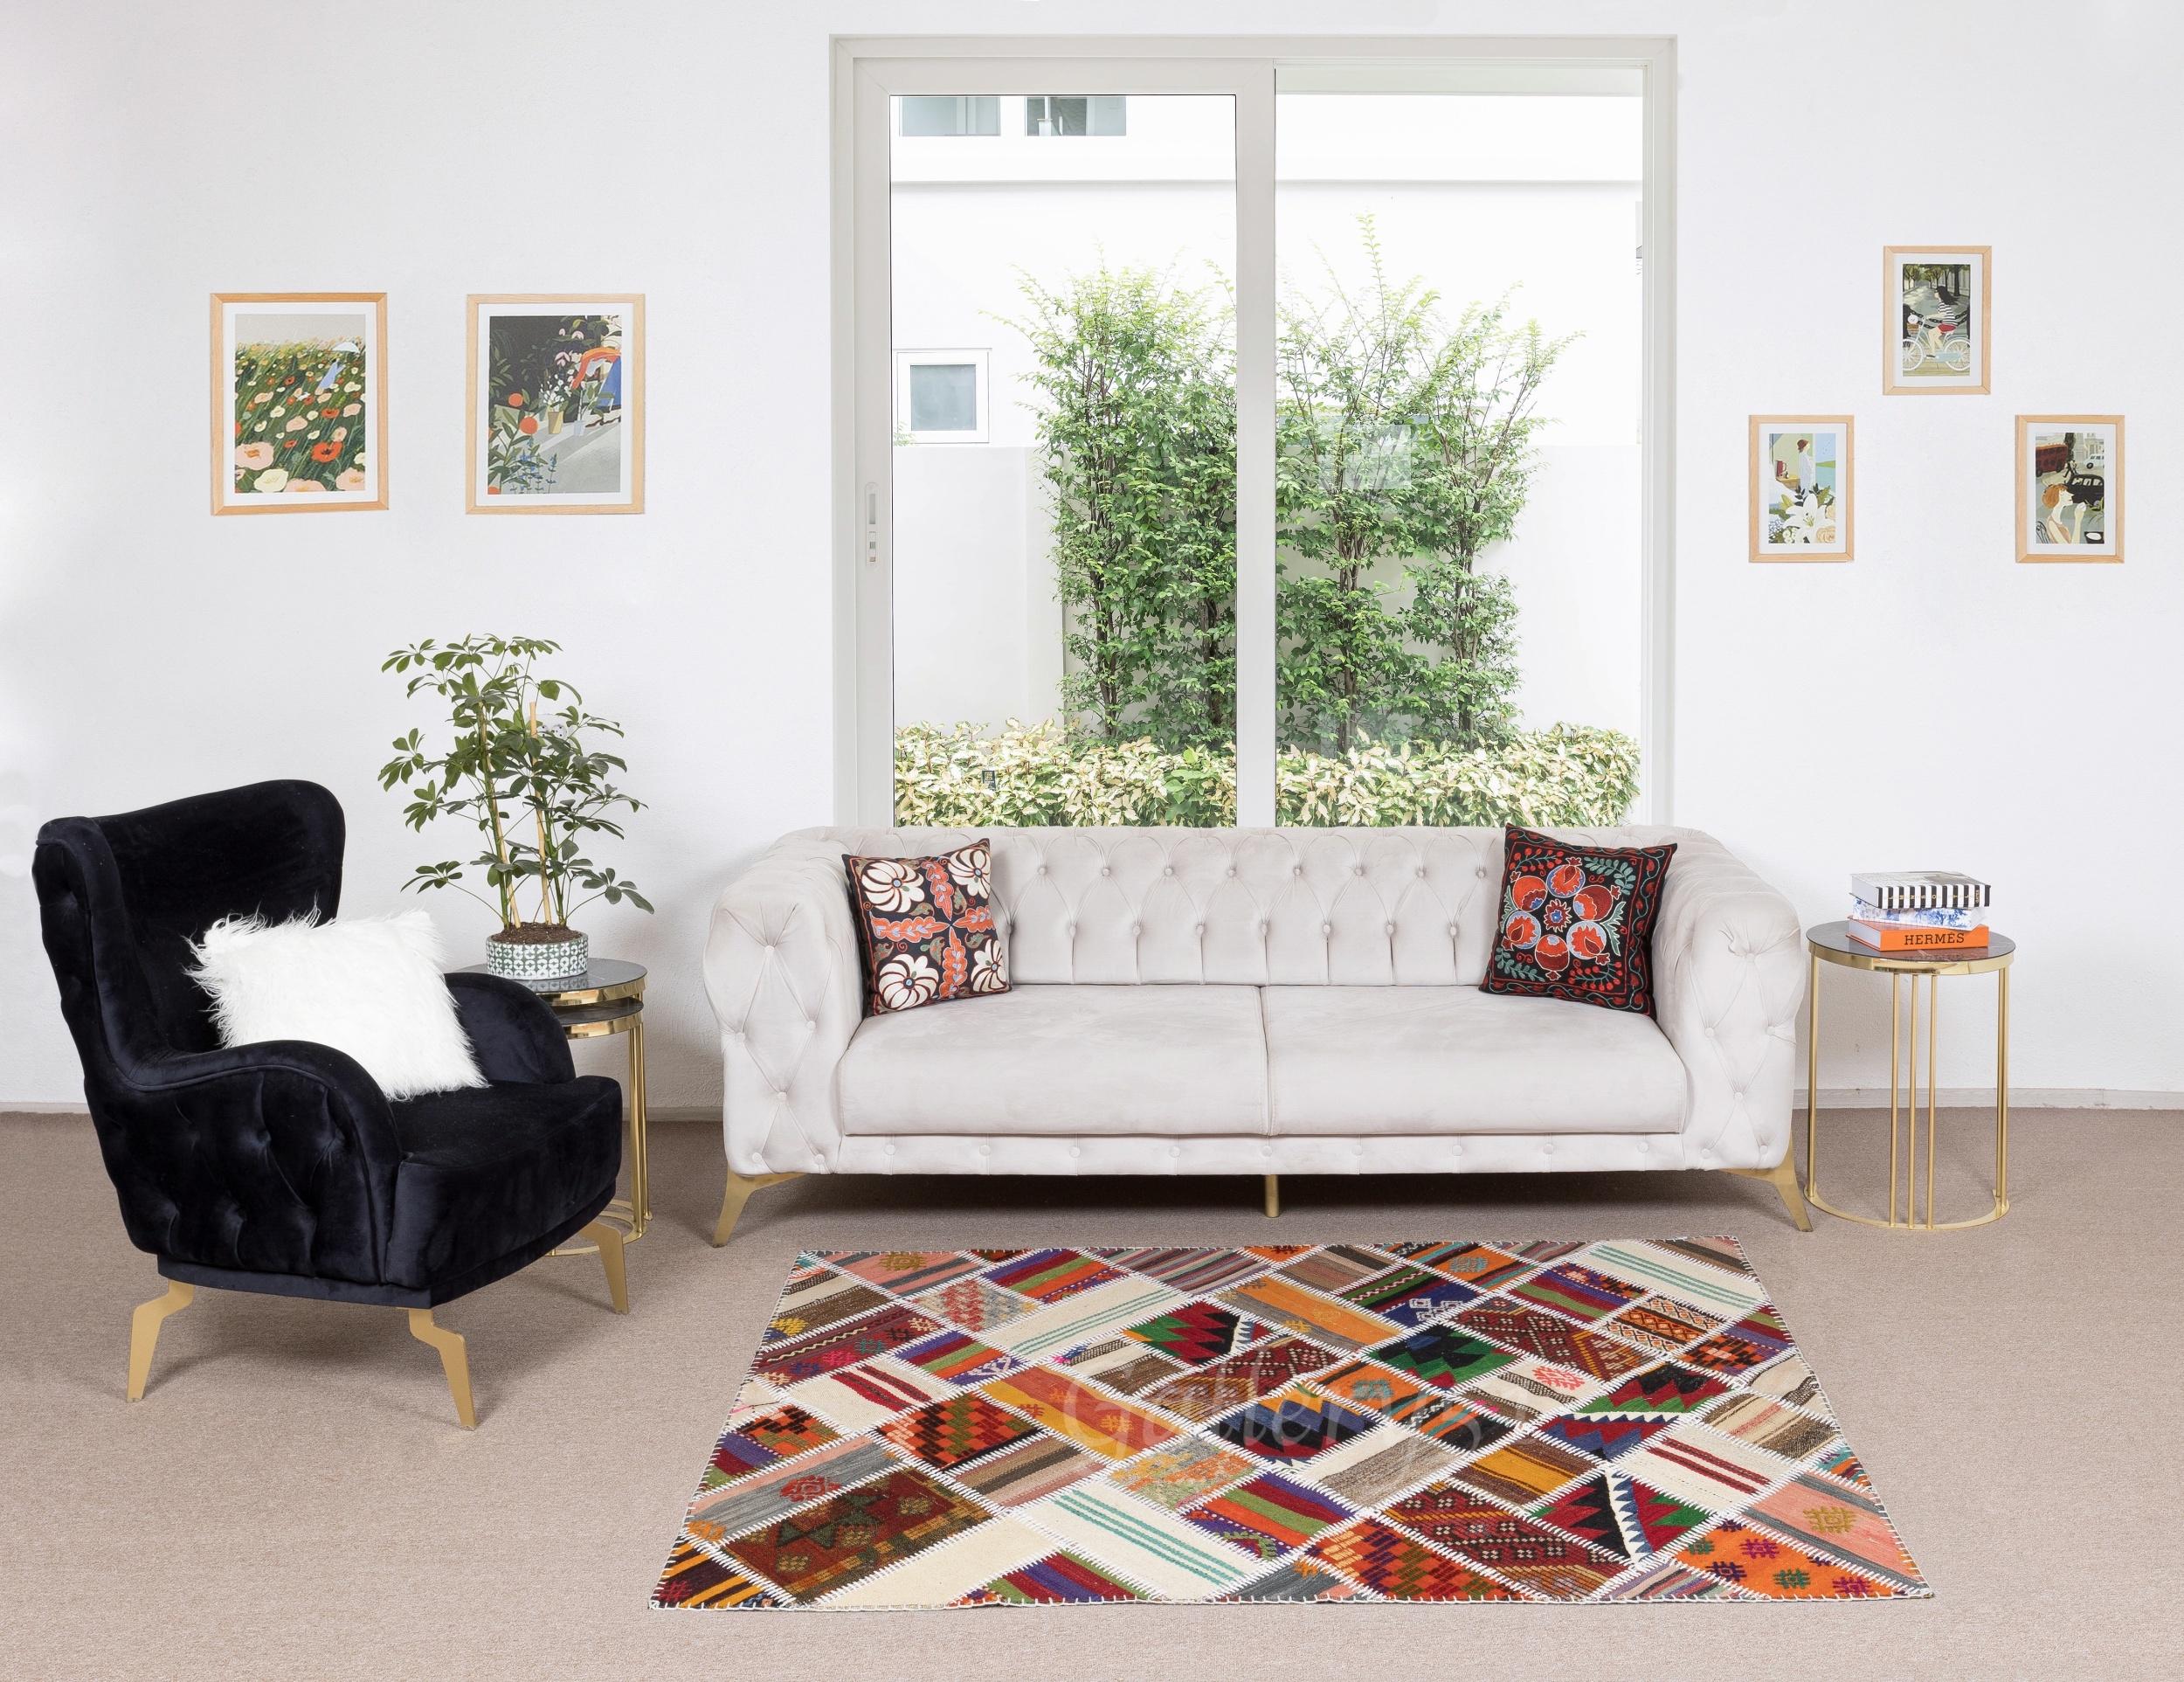 This Patchwork rug is hand-made from assorted pieces of vintage Turkish Kilims (flat-woven rugs), it is reinforced with a durable cotton twill/underlay stitched on the back for a smooth finish and extra thickness. The banded kilims used in making